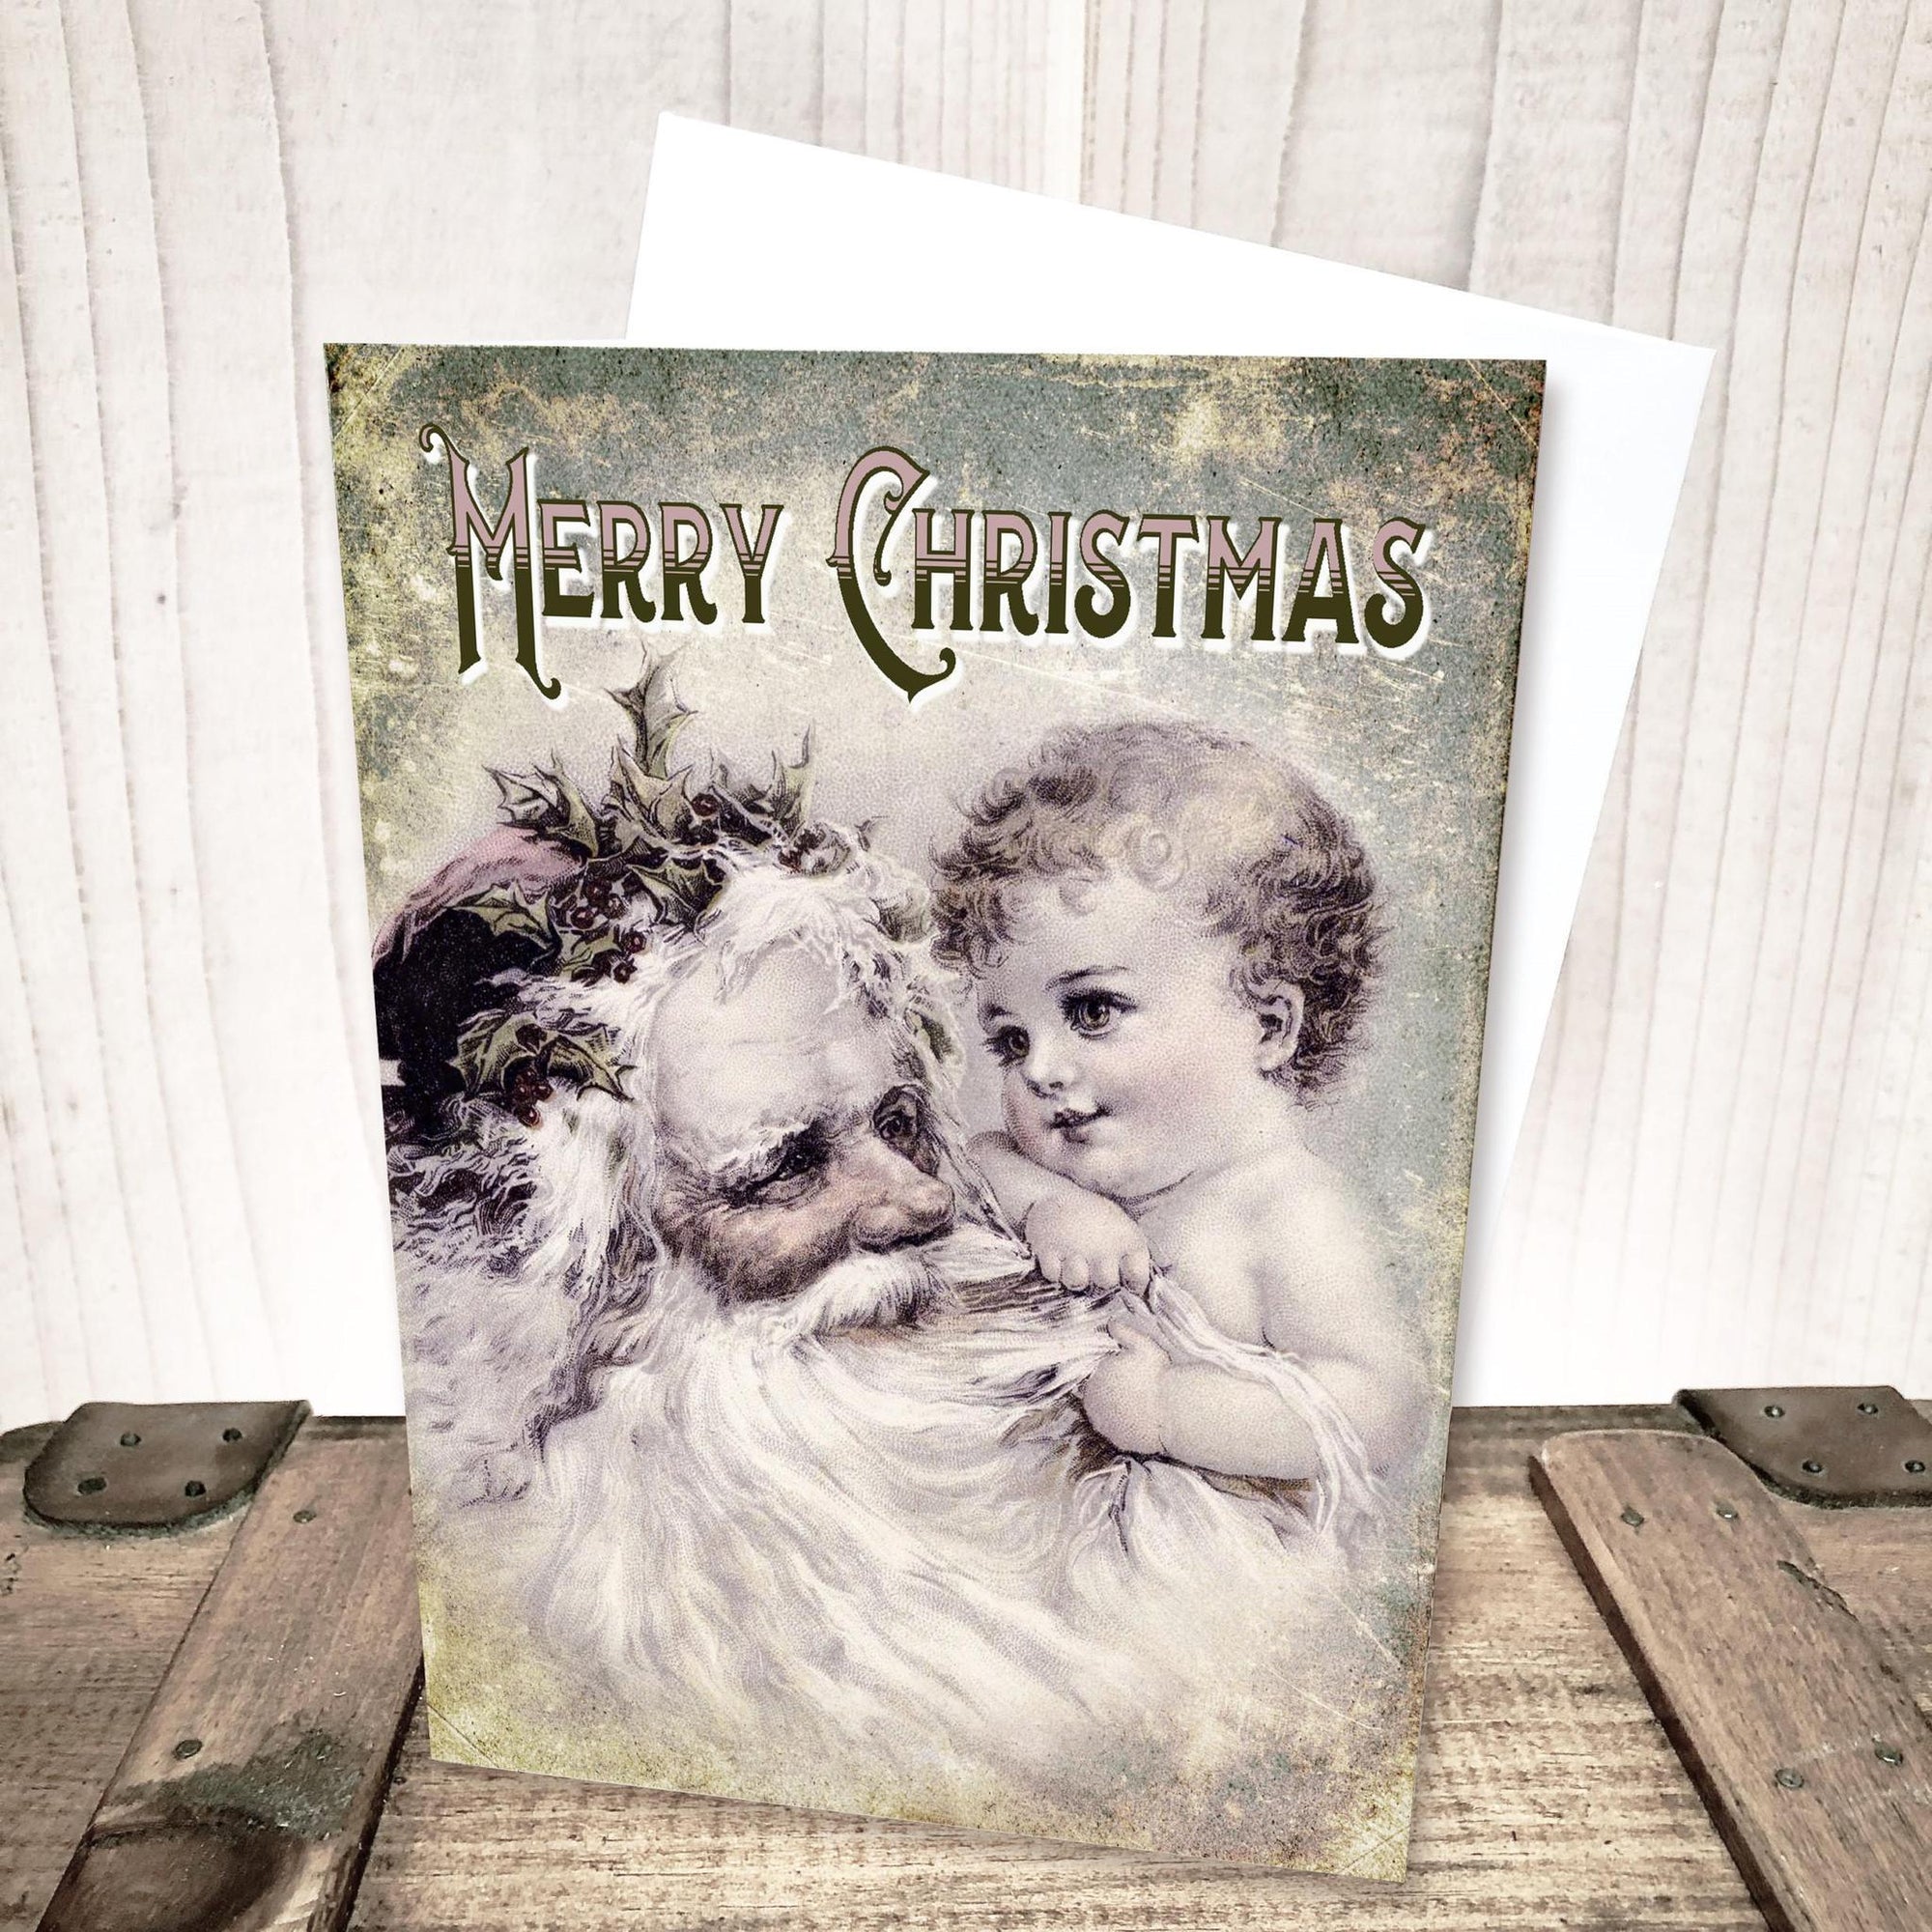 Vintage Santa Christmas Card by Yesterday's Best